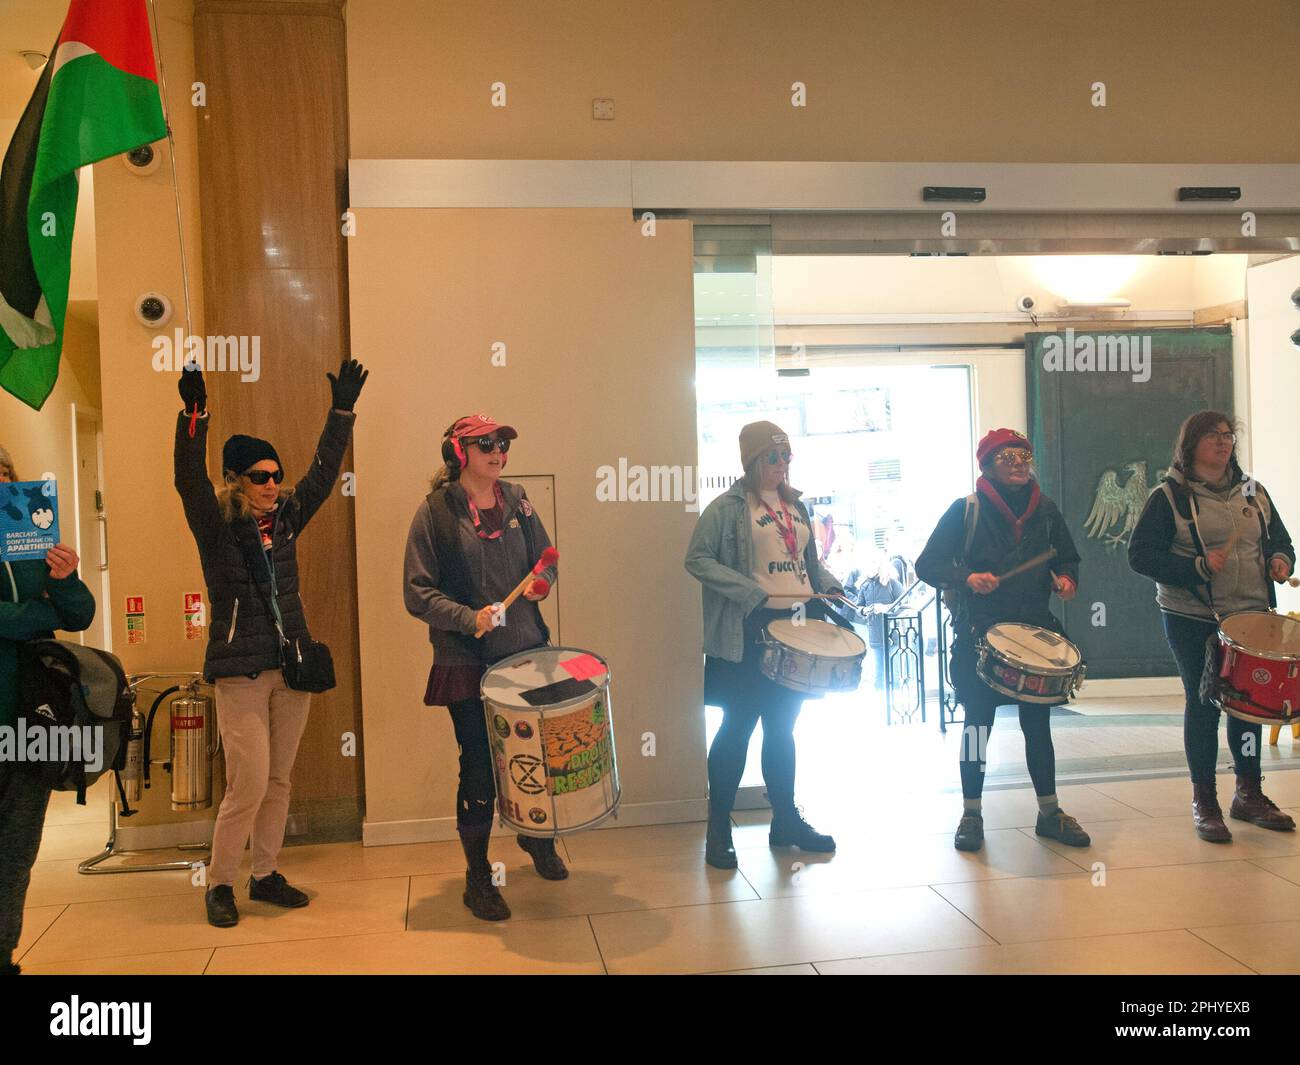 In a Barclays bank in Brighton a protest in support of Palestine takes place Stock Photo